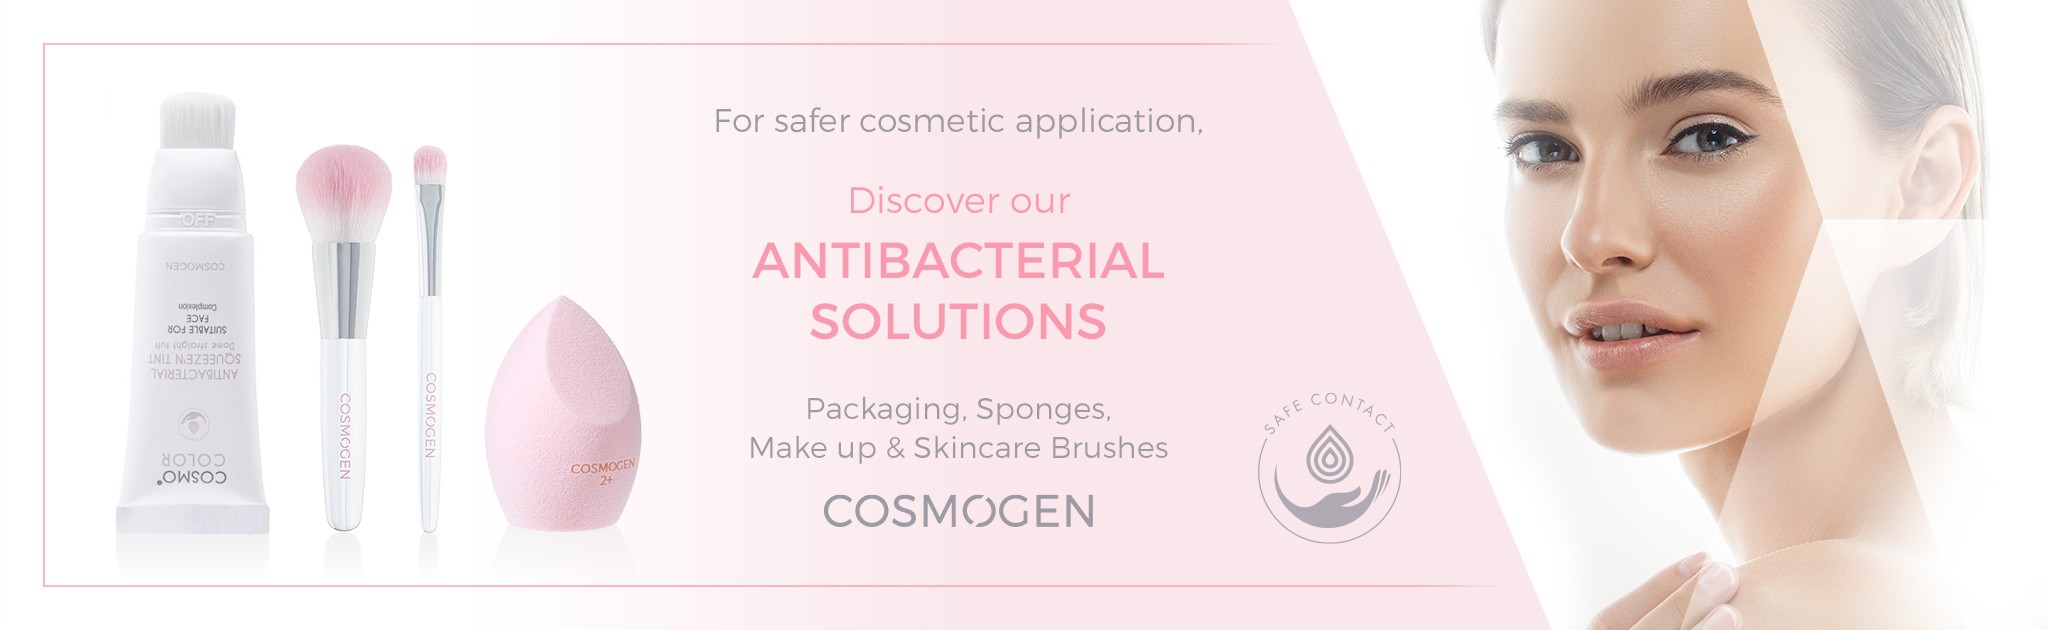 https://www.cosmogen.fr/d30-antibac-squeeze-n-tint.html?search_query=antibac&results=13